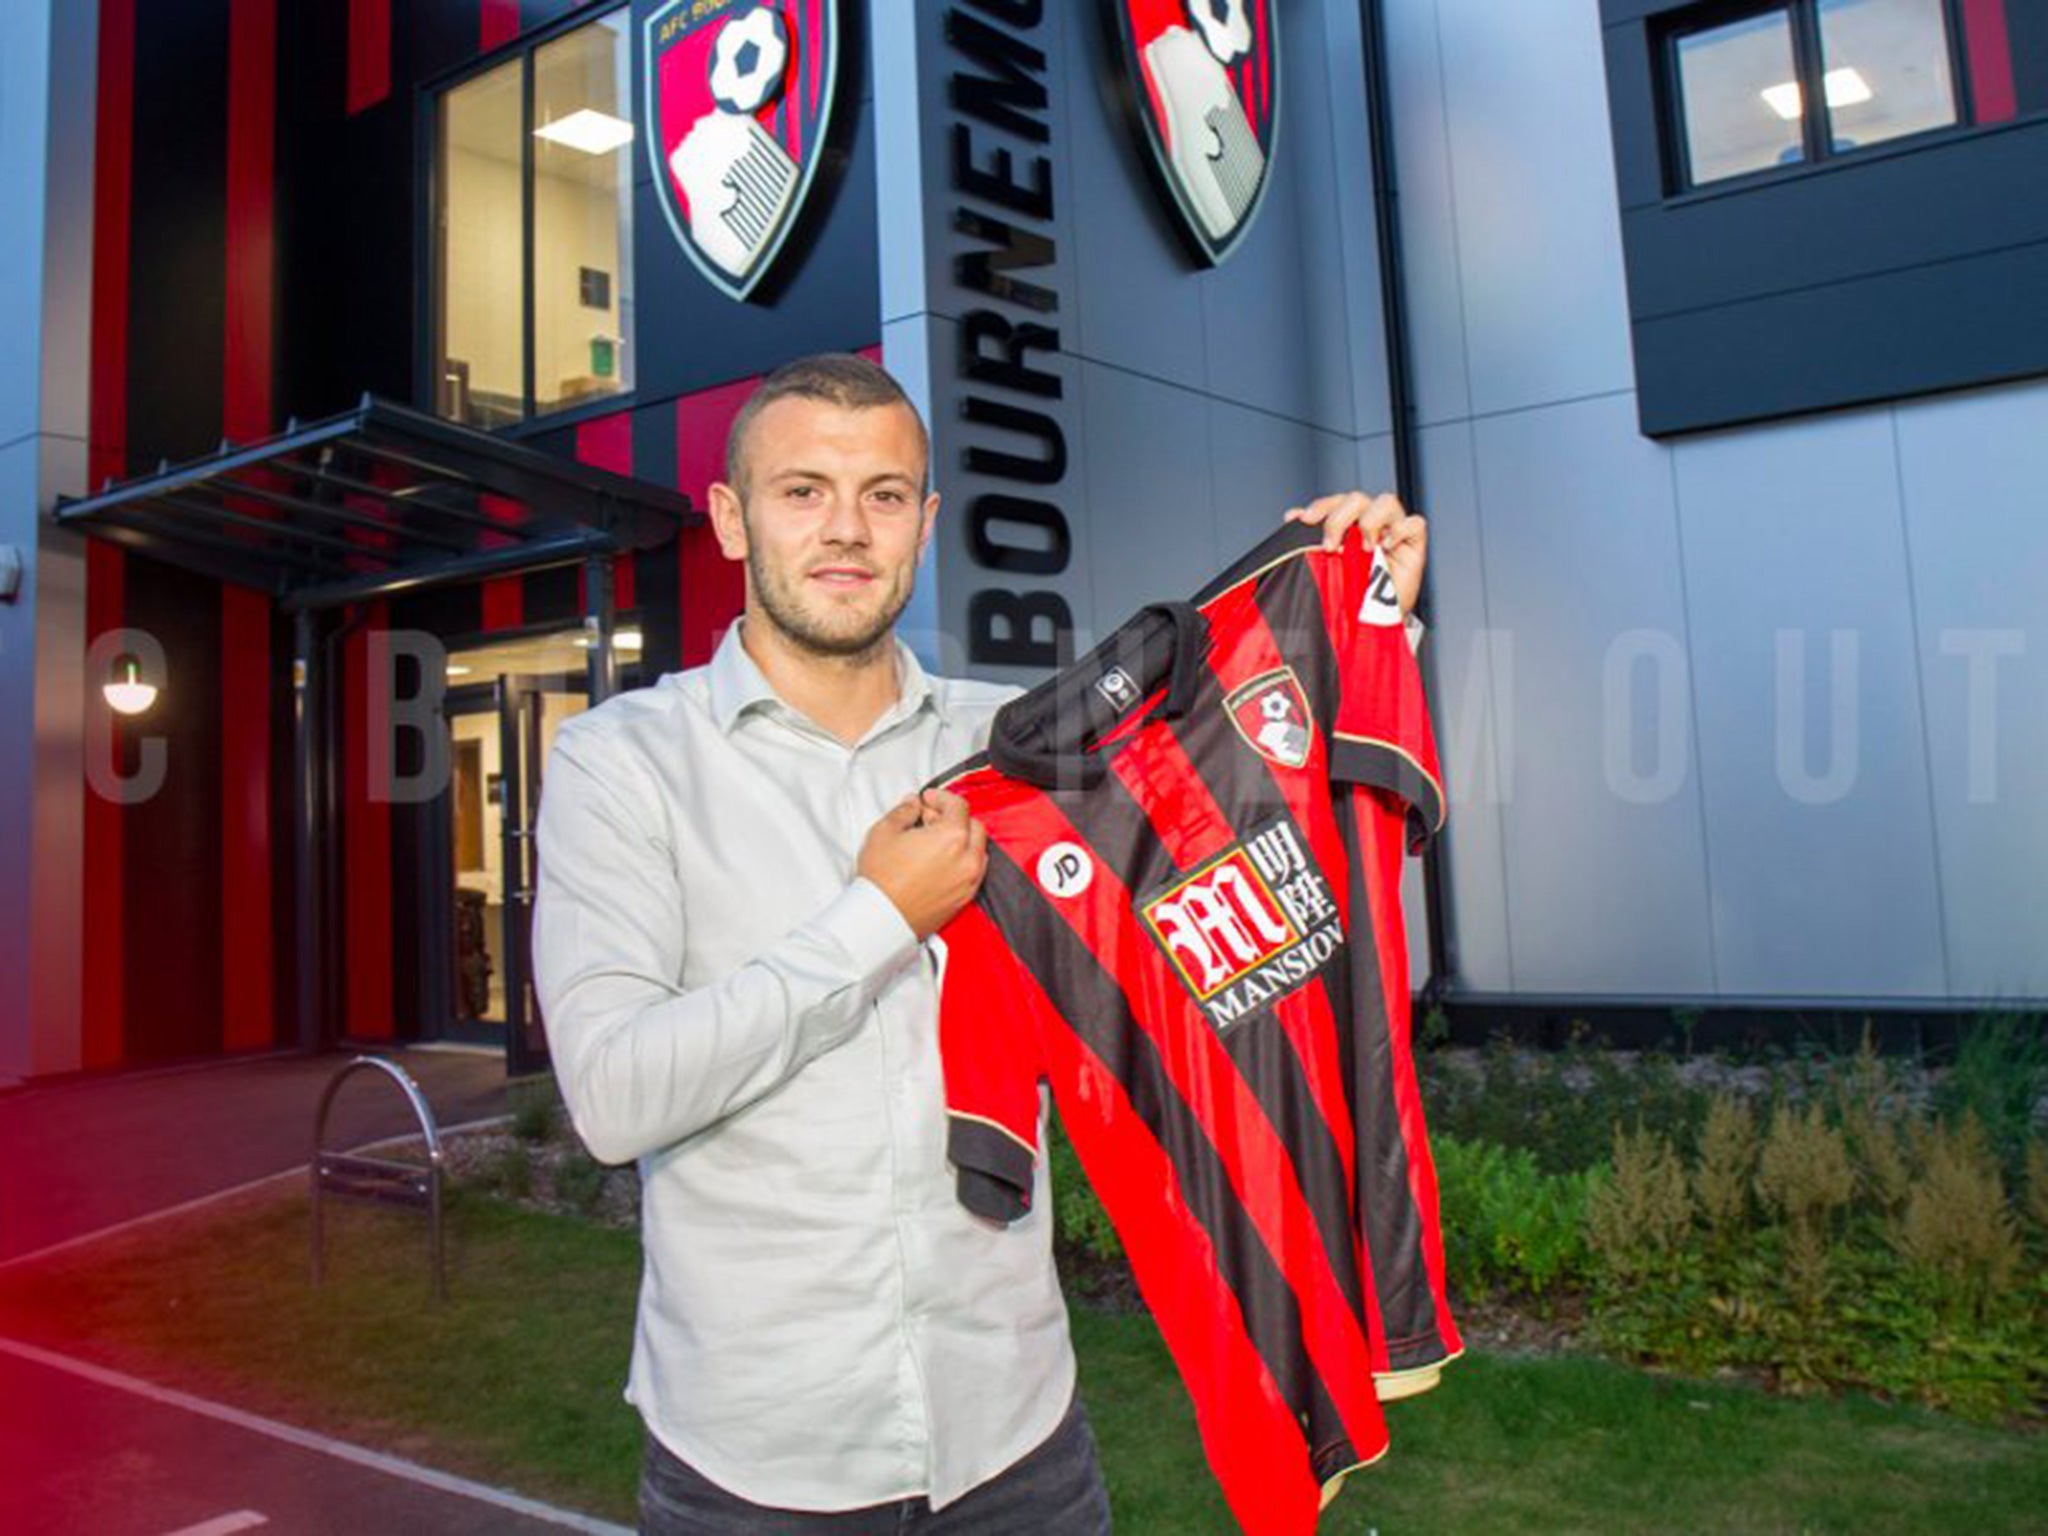 Wilshere poses with a Bournemouth shirt outside the Vitality Stadium